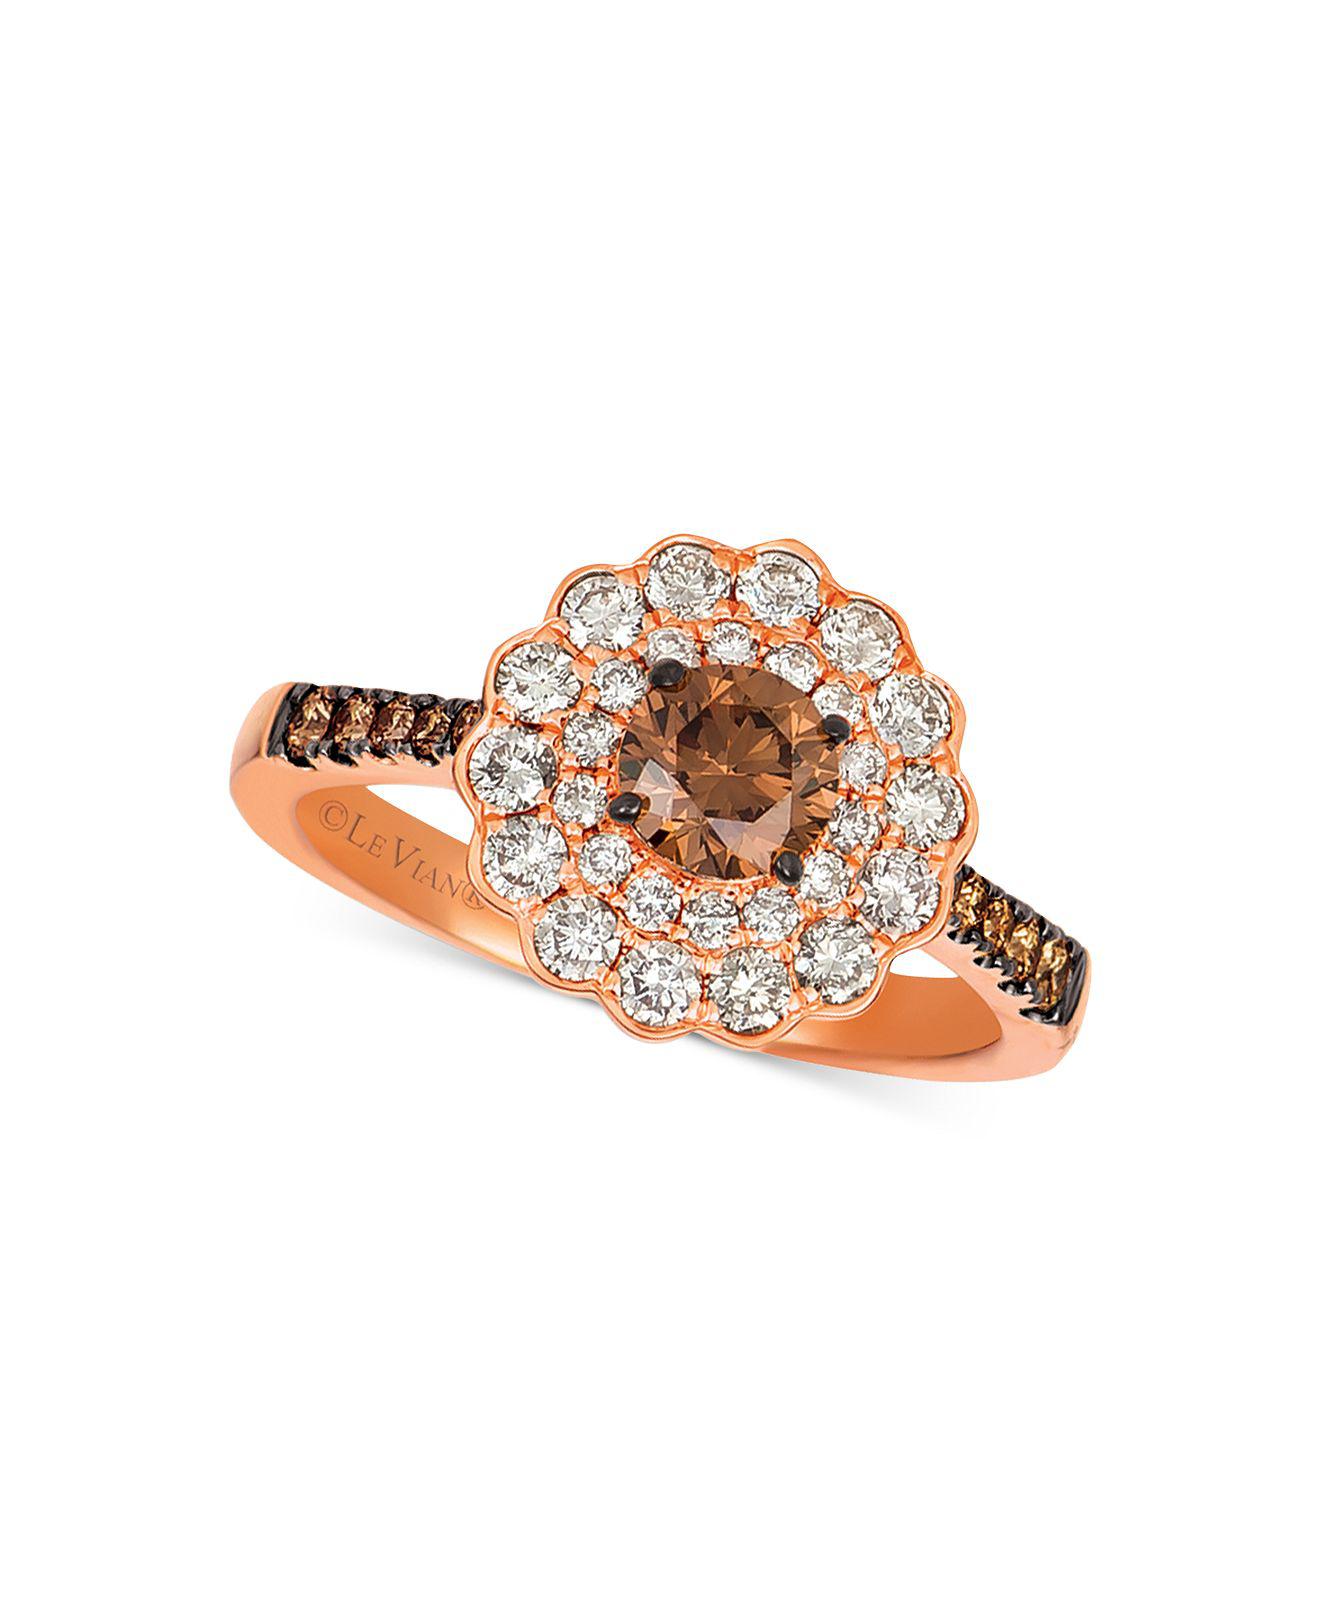 Lyst Le Vian ® Chocolate® & Nudetm Diamond Floral Ring (11/3 Ct. T.w.) In 14k Rose Gold in